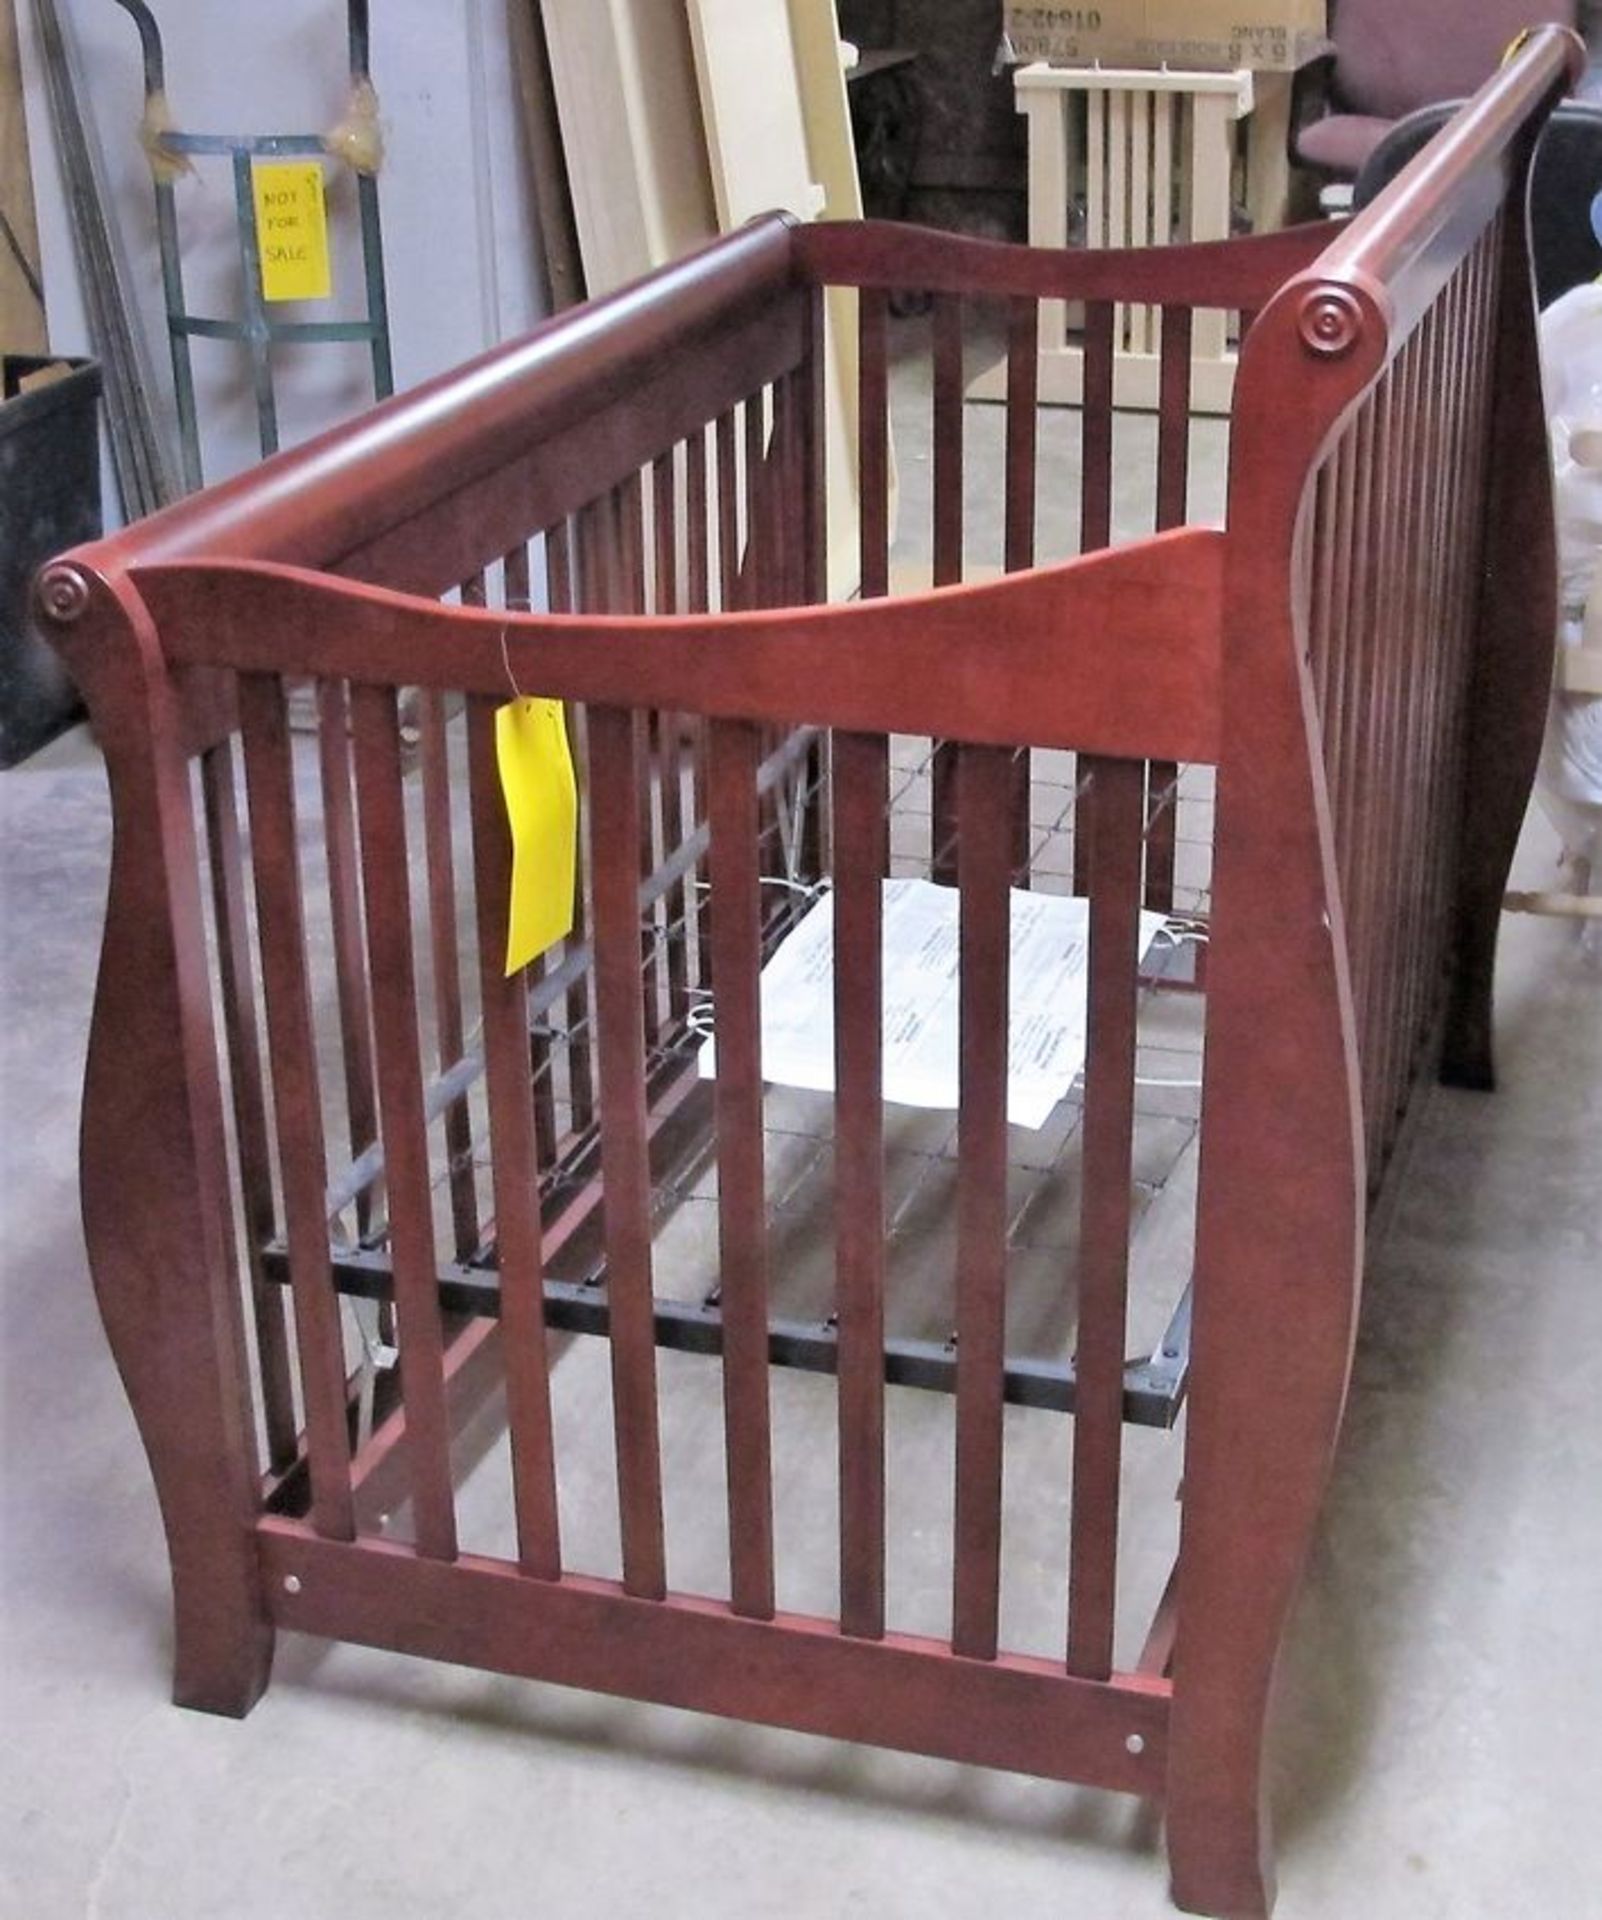 FINISHED WOODEN BABY CRIB - Image 2 of 2